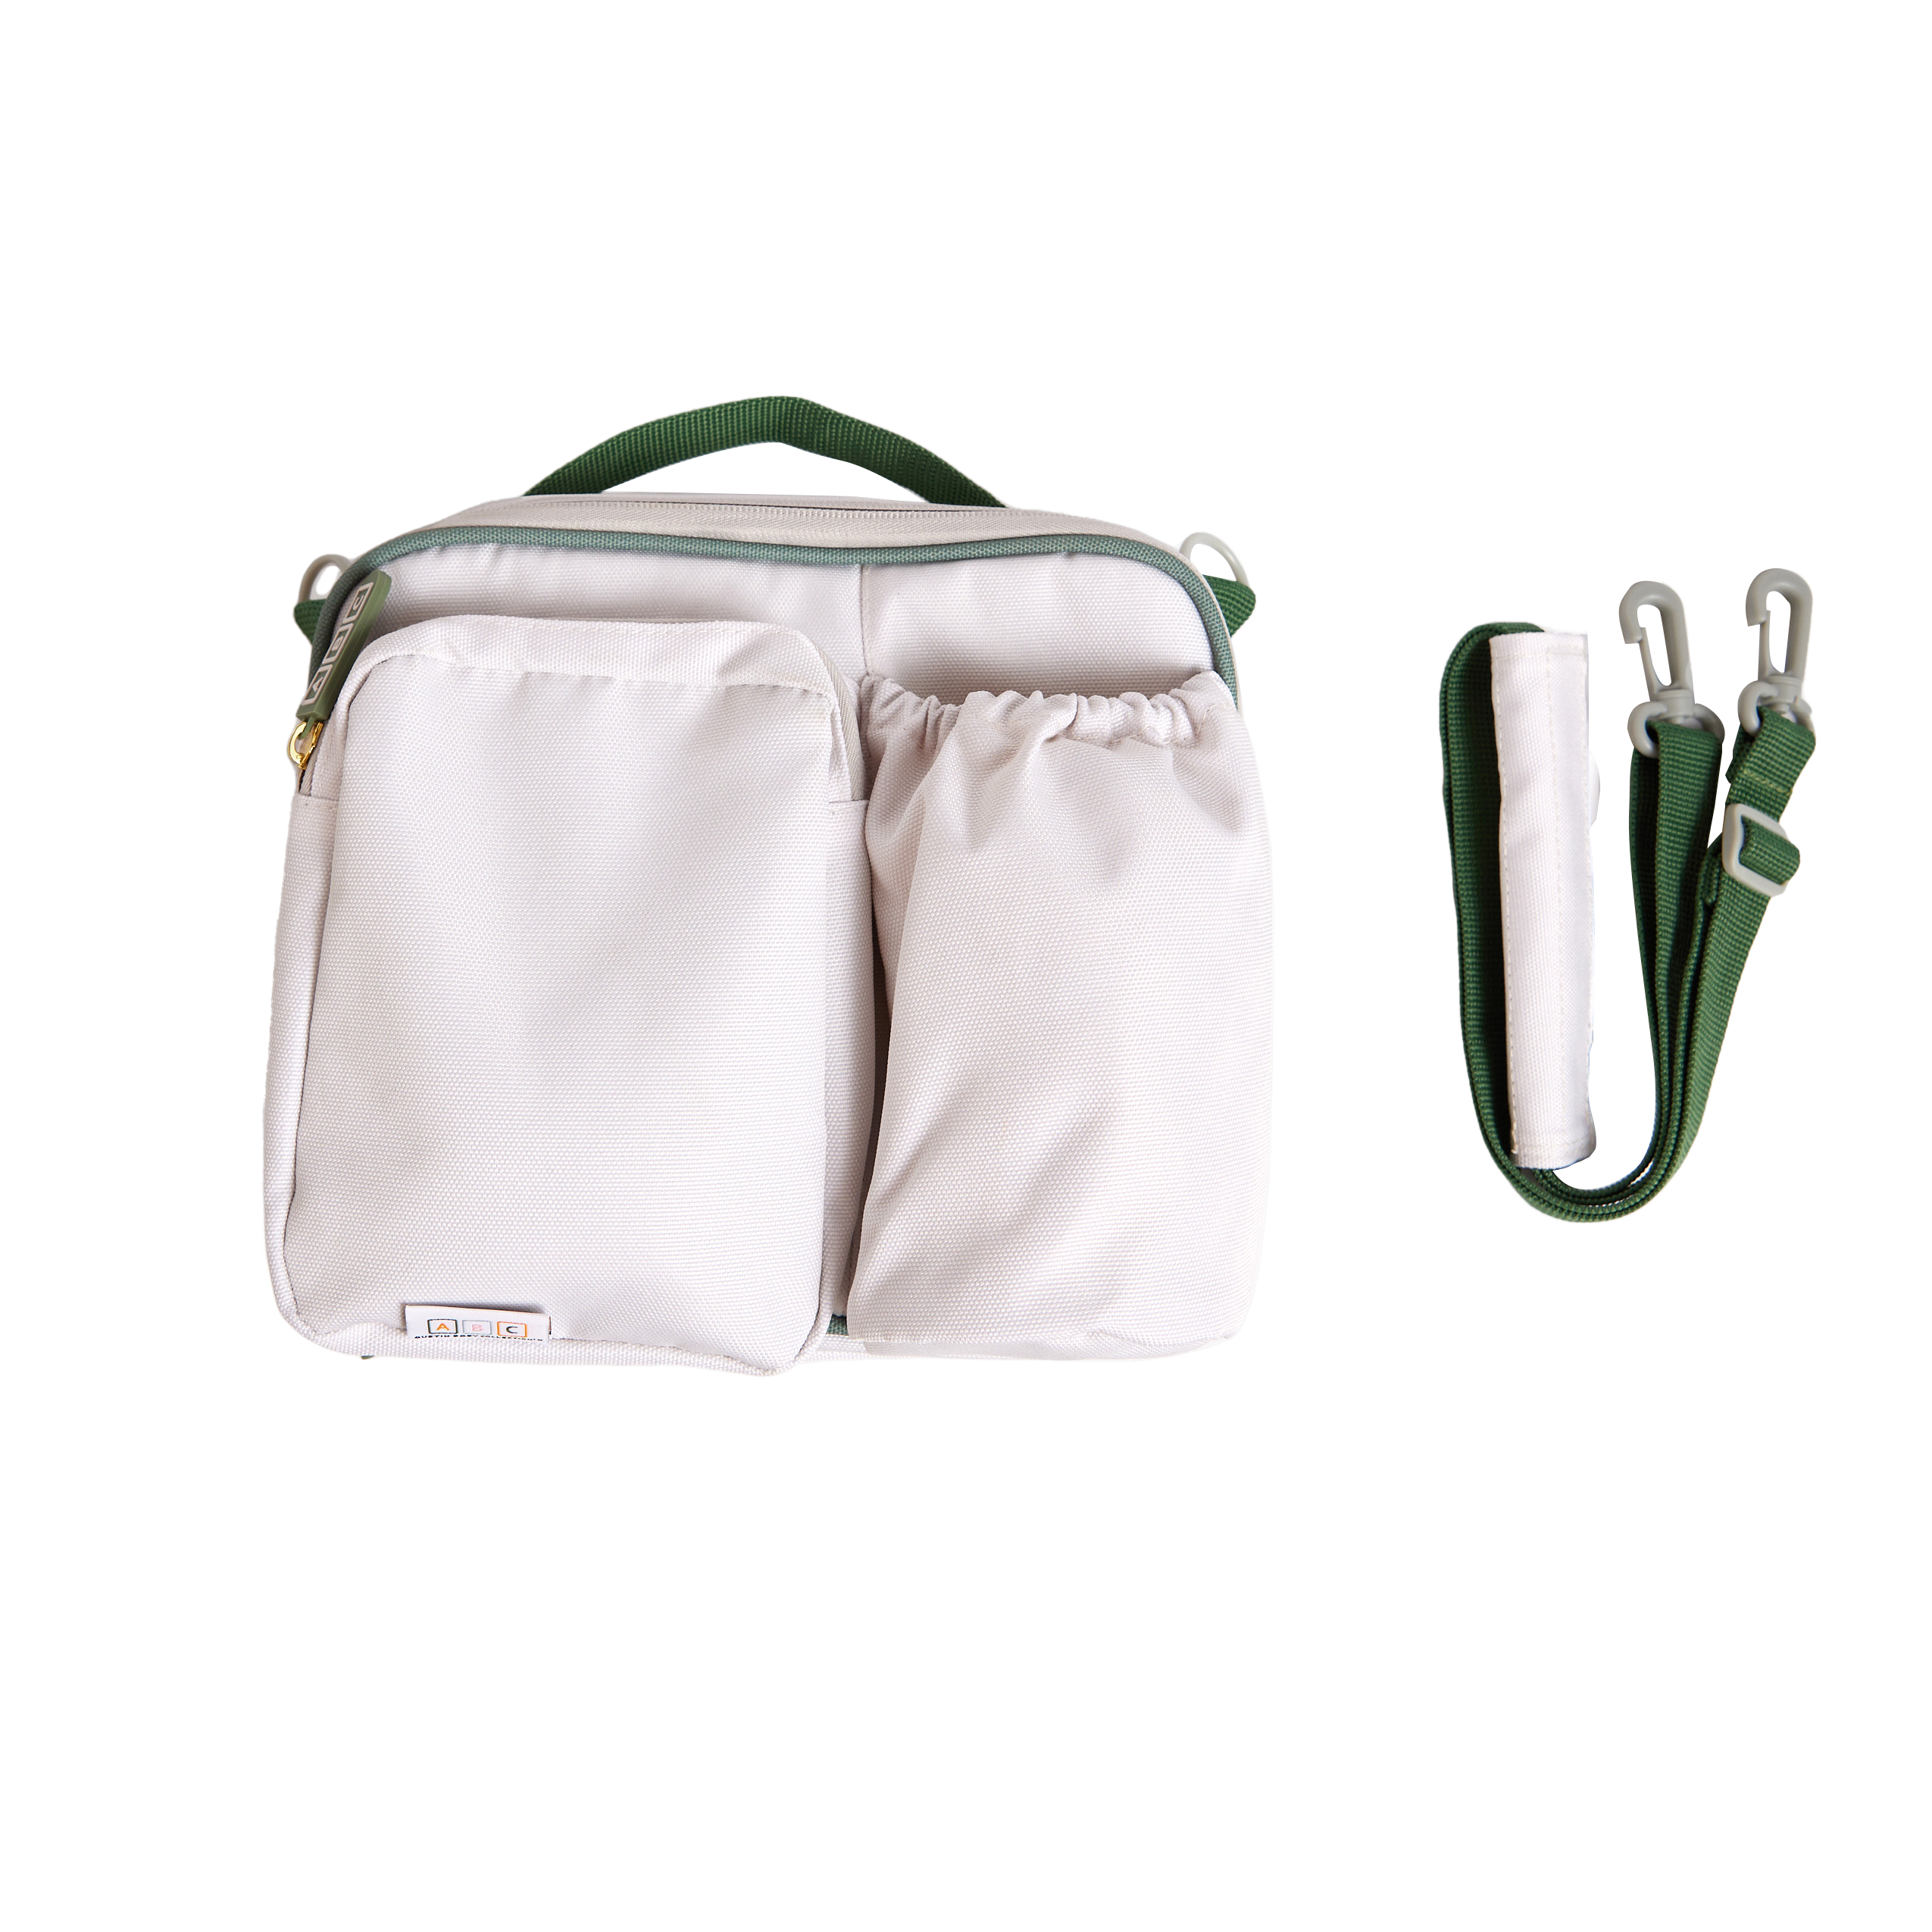 cream lunch bag with green accents and shoulder strap